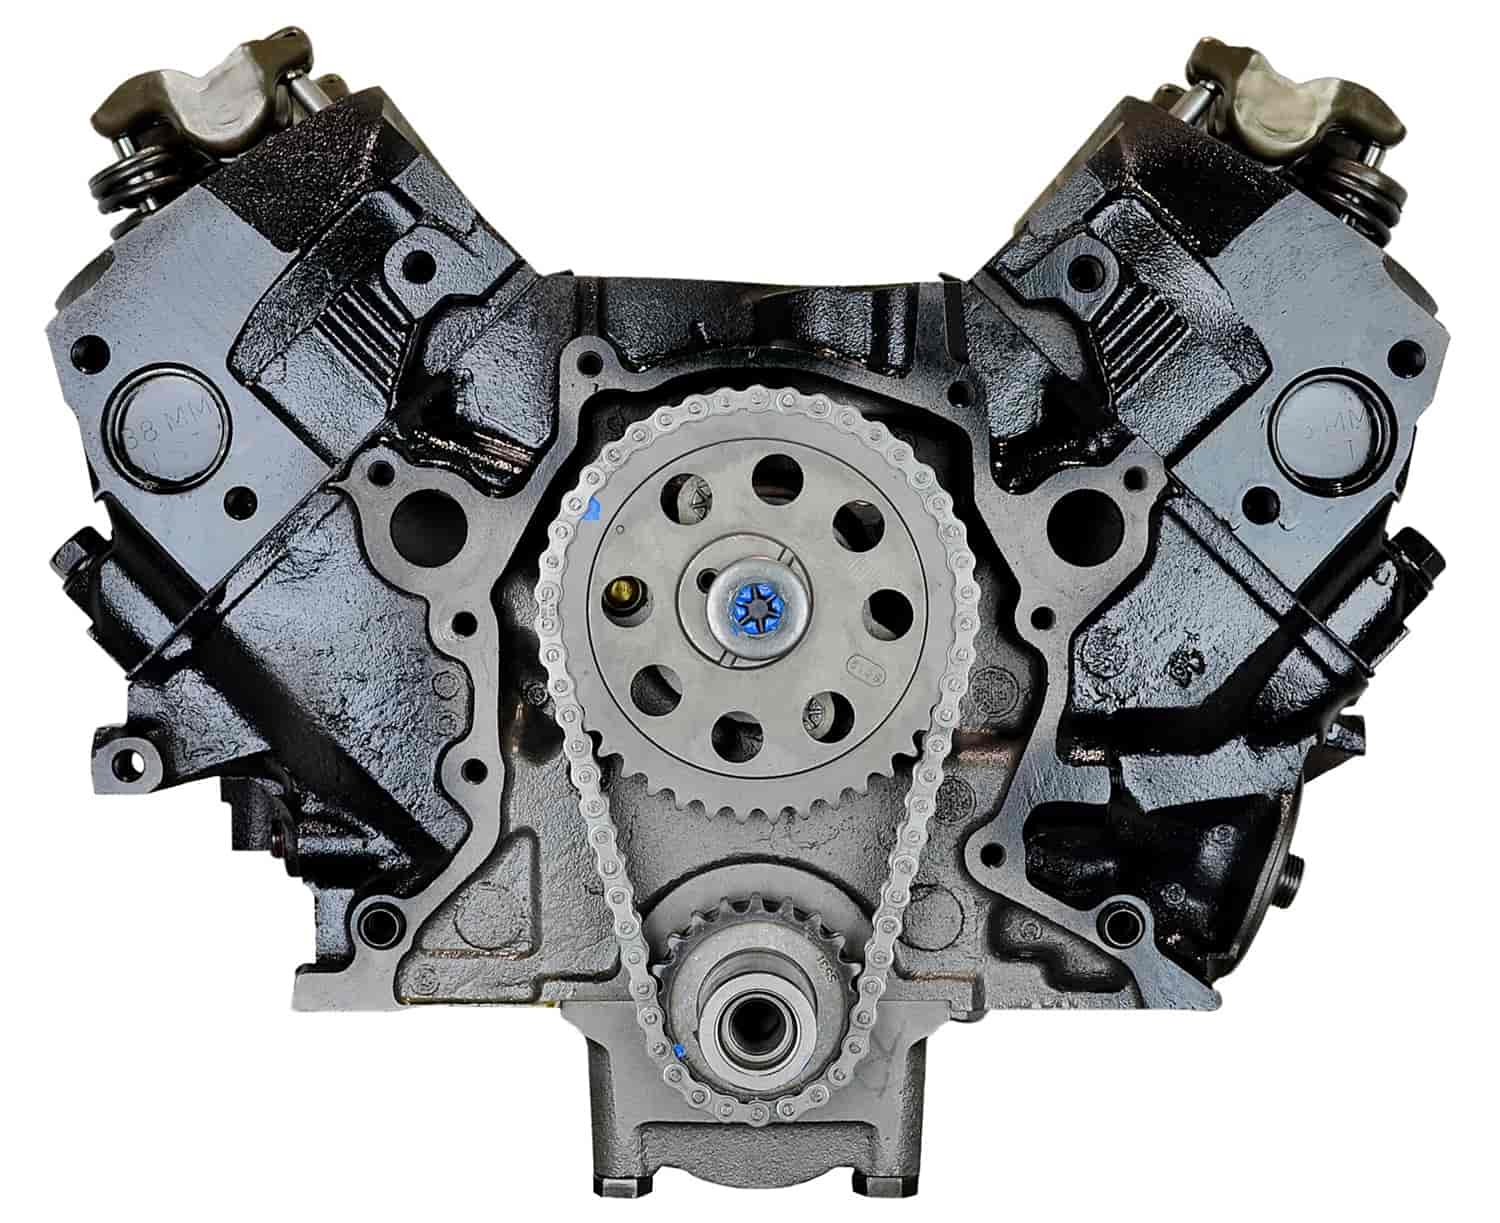 Remanufactured Crate Engine for 1996-1997 Ford Explorer &